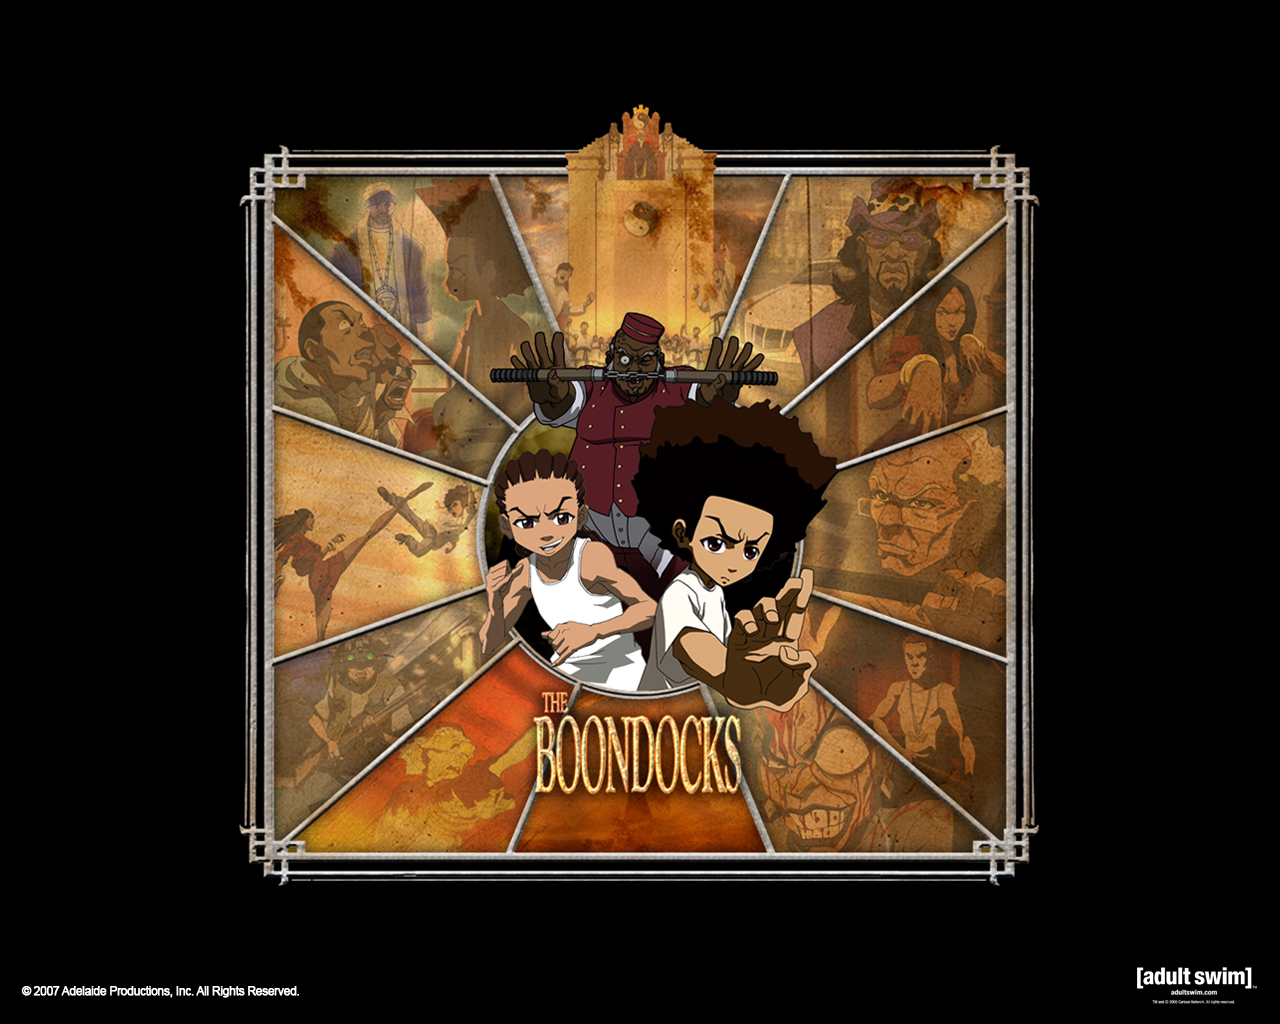 The Boondocks Free Desktop Wallpapers for HD, Widescreen and Mobile